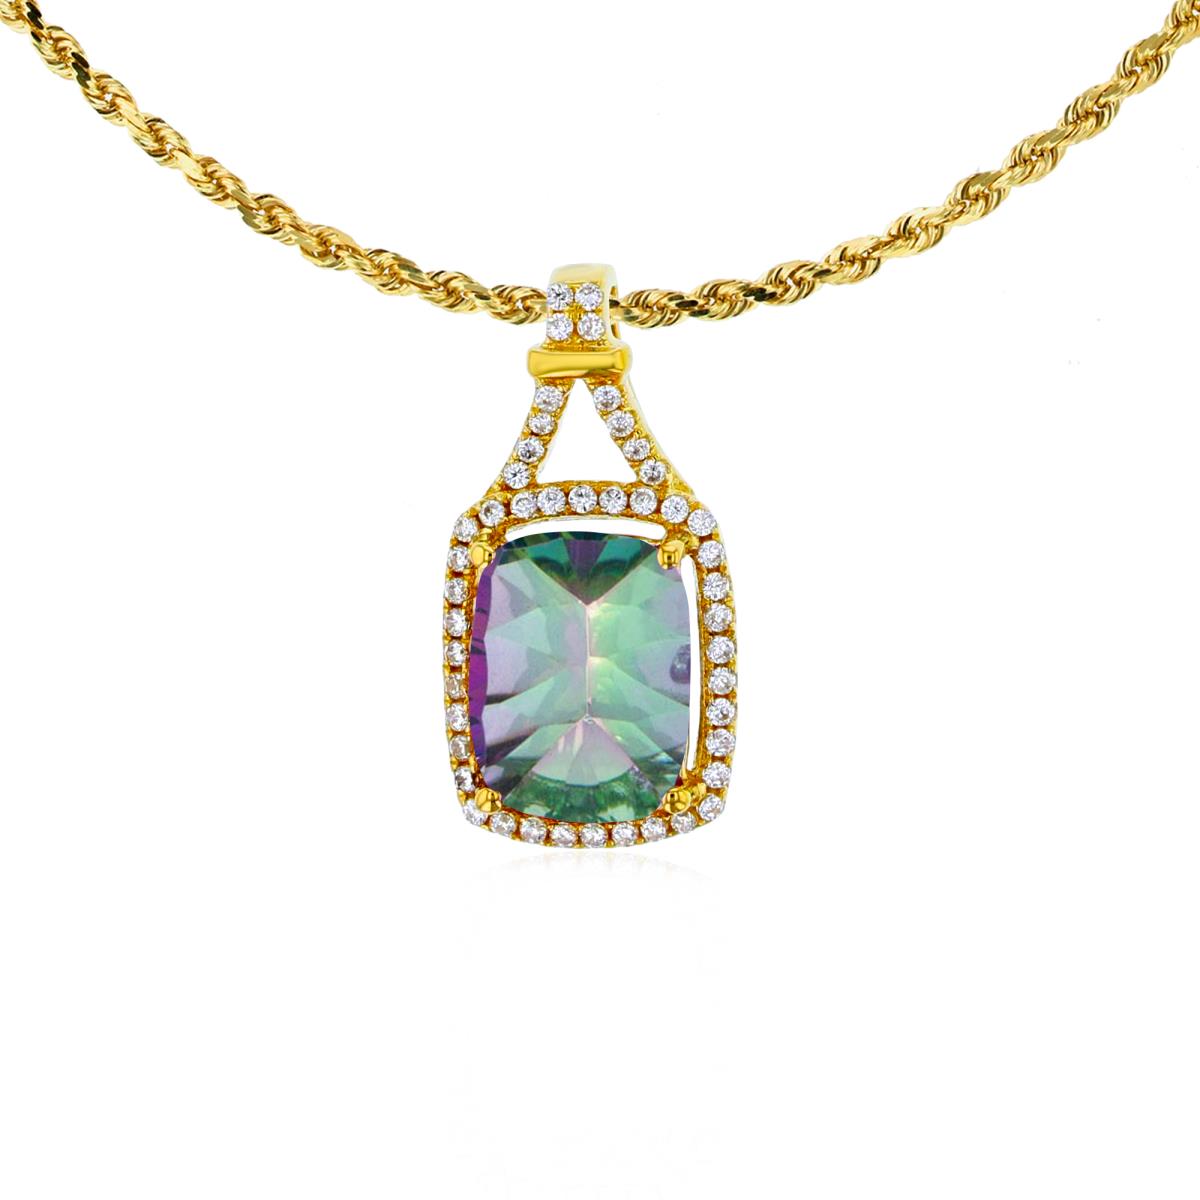 10K Yellow Gold 8x6mm Cushion Mystic Green Topaz & 0.13 CTTW Rd Diamonds Halo 18" Rope Chain Necklace